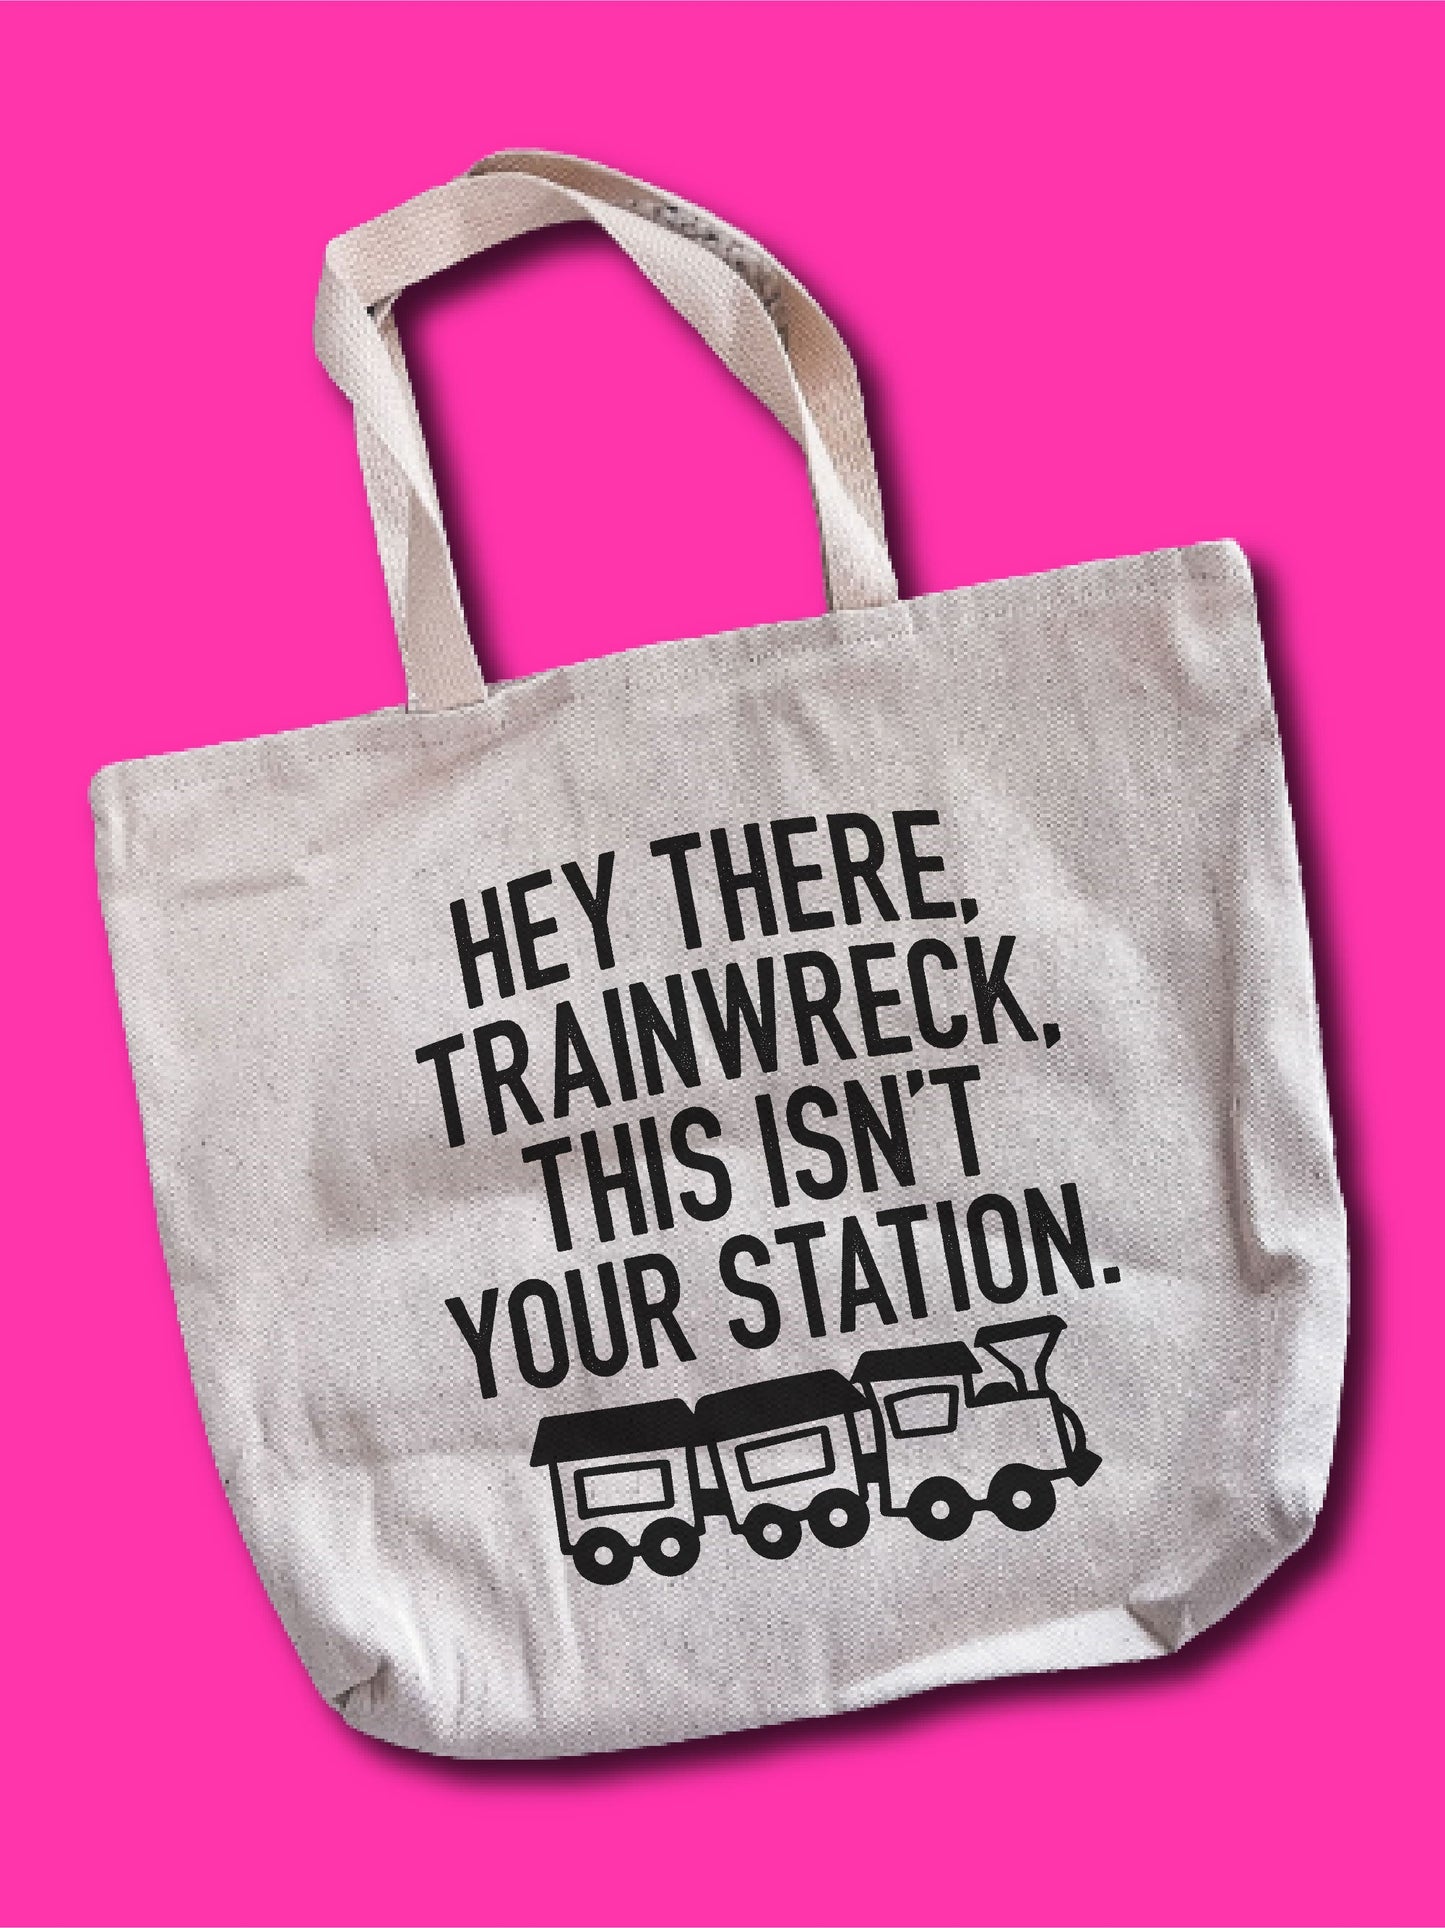 Hey There Trainwreck, This Isn't Your Station. Tote Bag